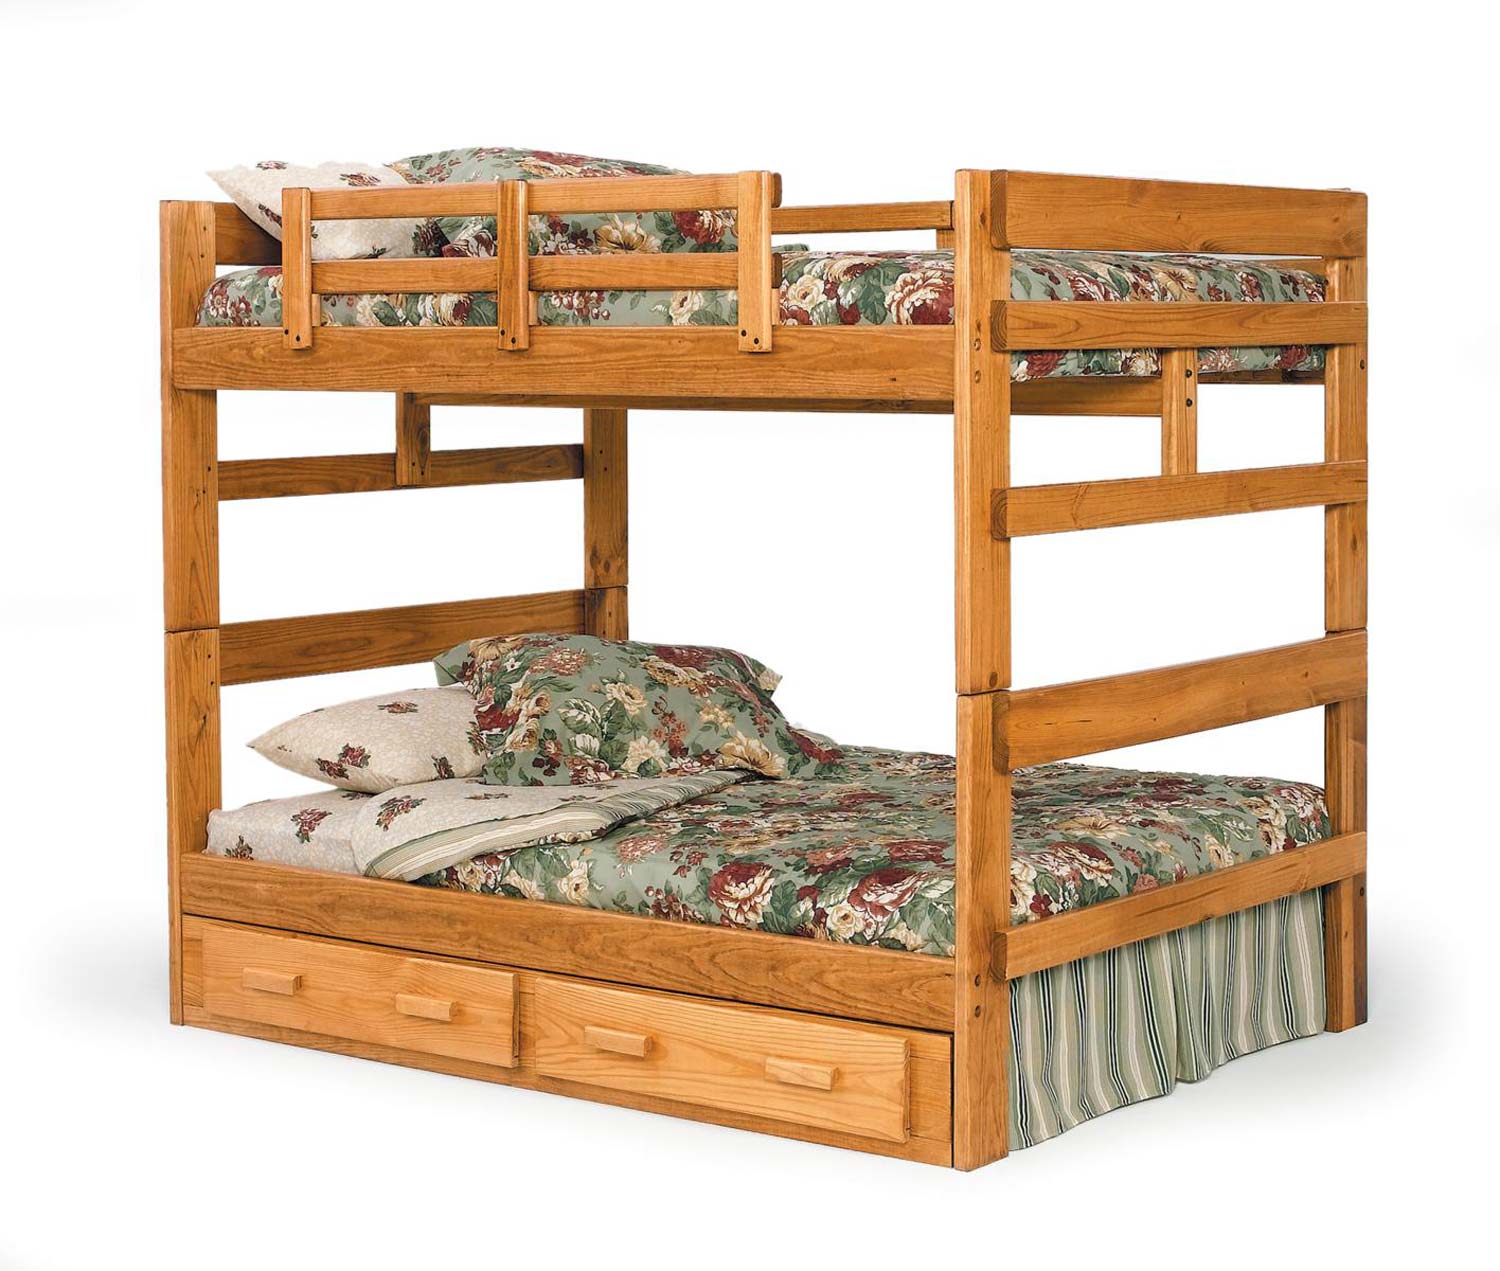 Chelsea Home 3626541-S Full Over Full Bunk with Underbed Storage - Honey